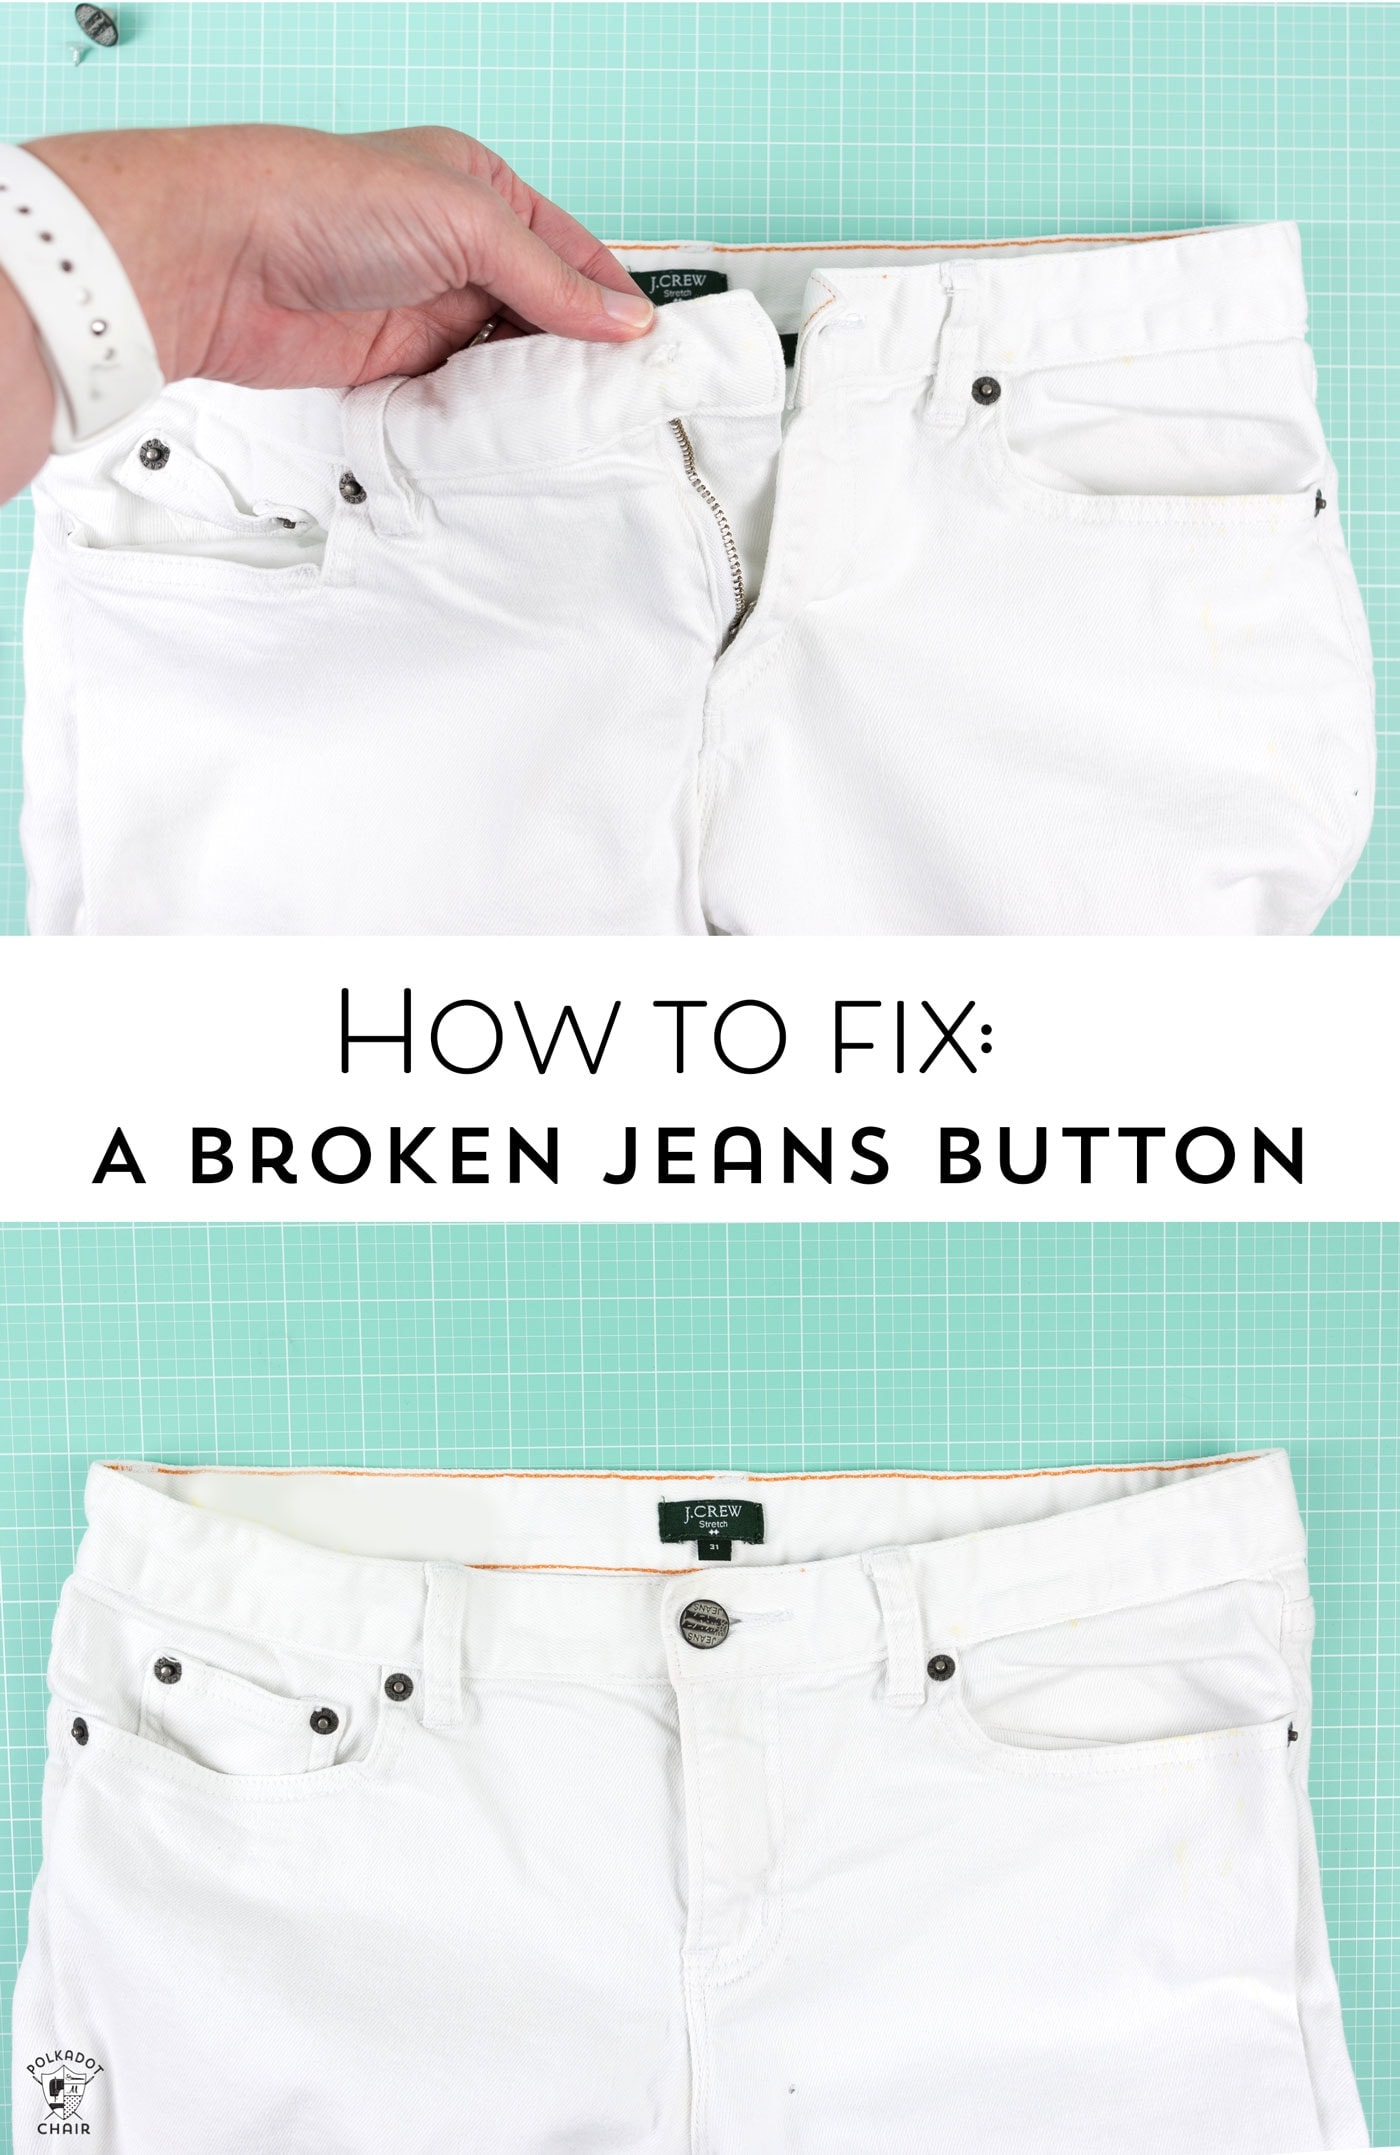 How to Fix a Broken Jeans Button